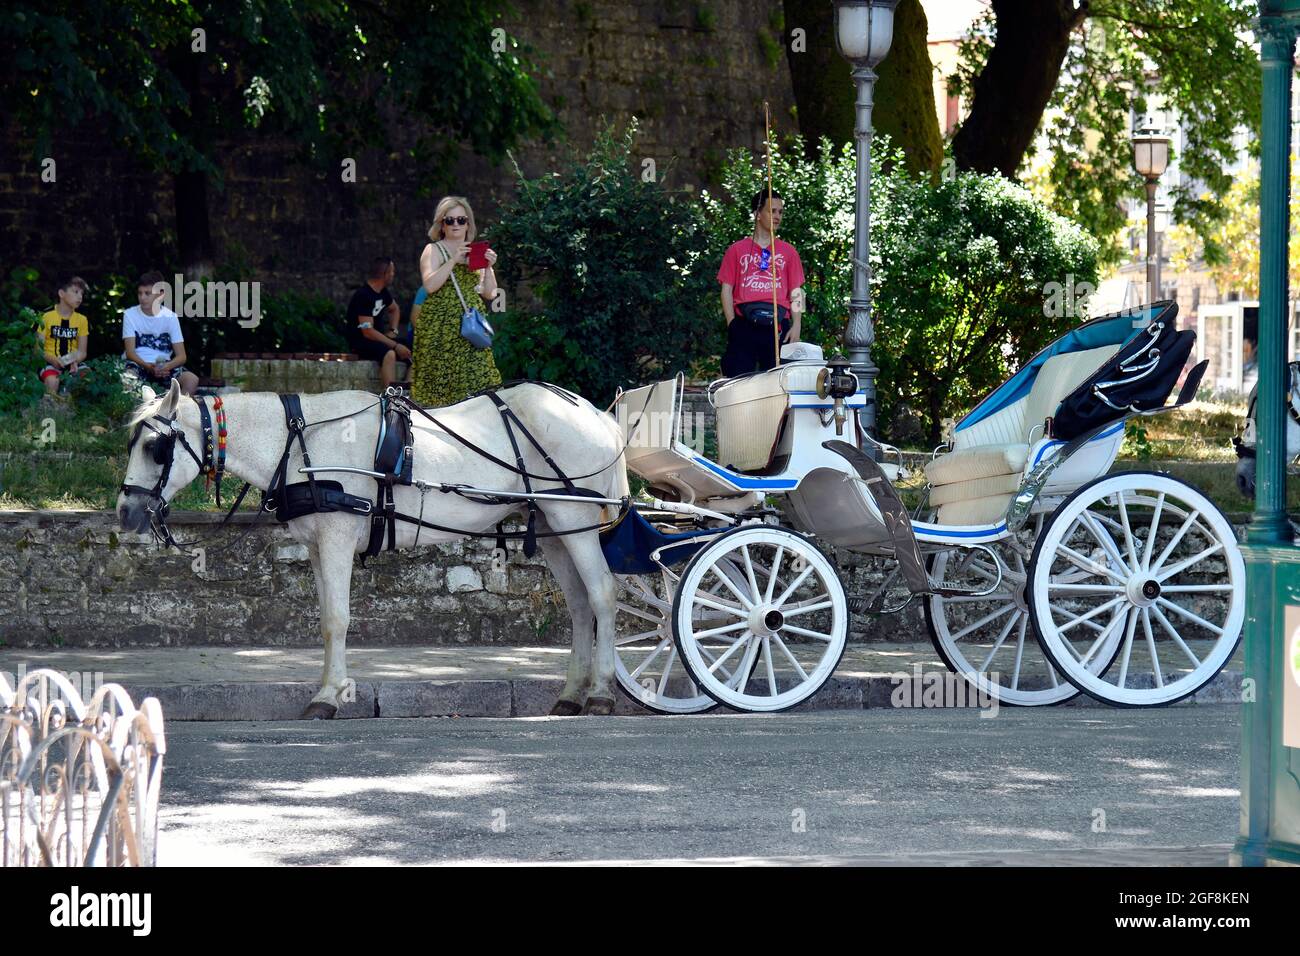 Ioannina, Greece - June 27, 2021: Unidentified people and traditional horse drawn coach for sightseeing in the capital of Epirus Stock Photo